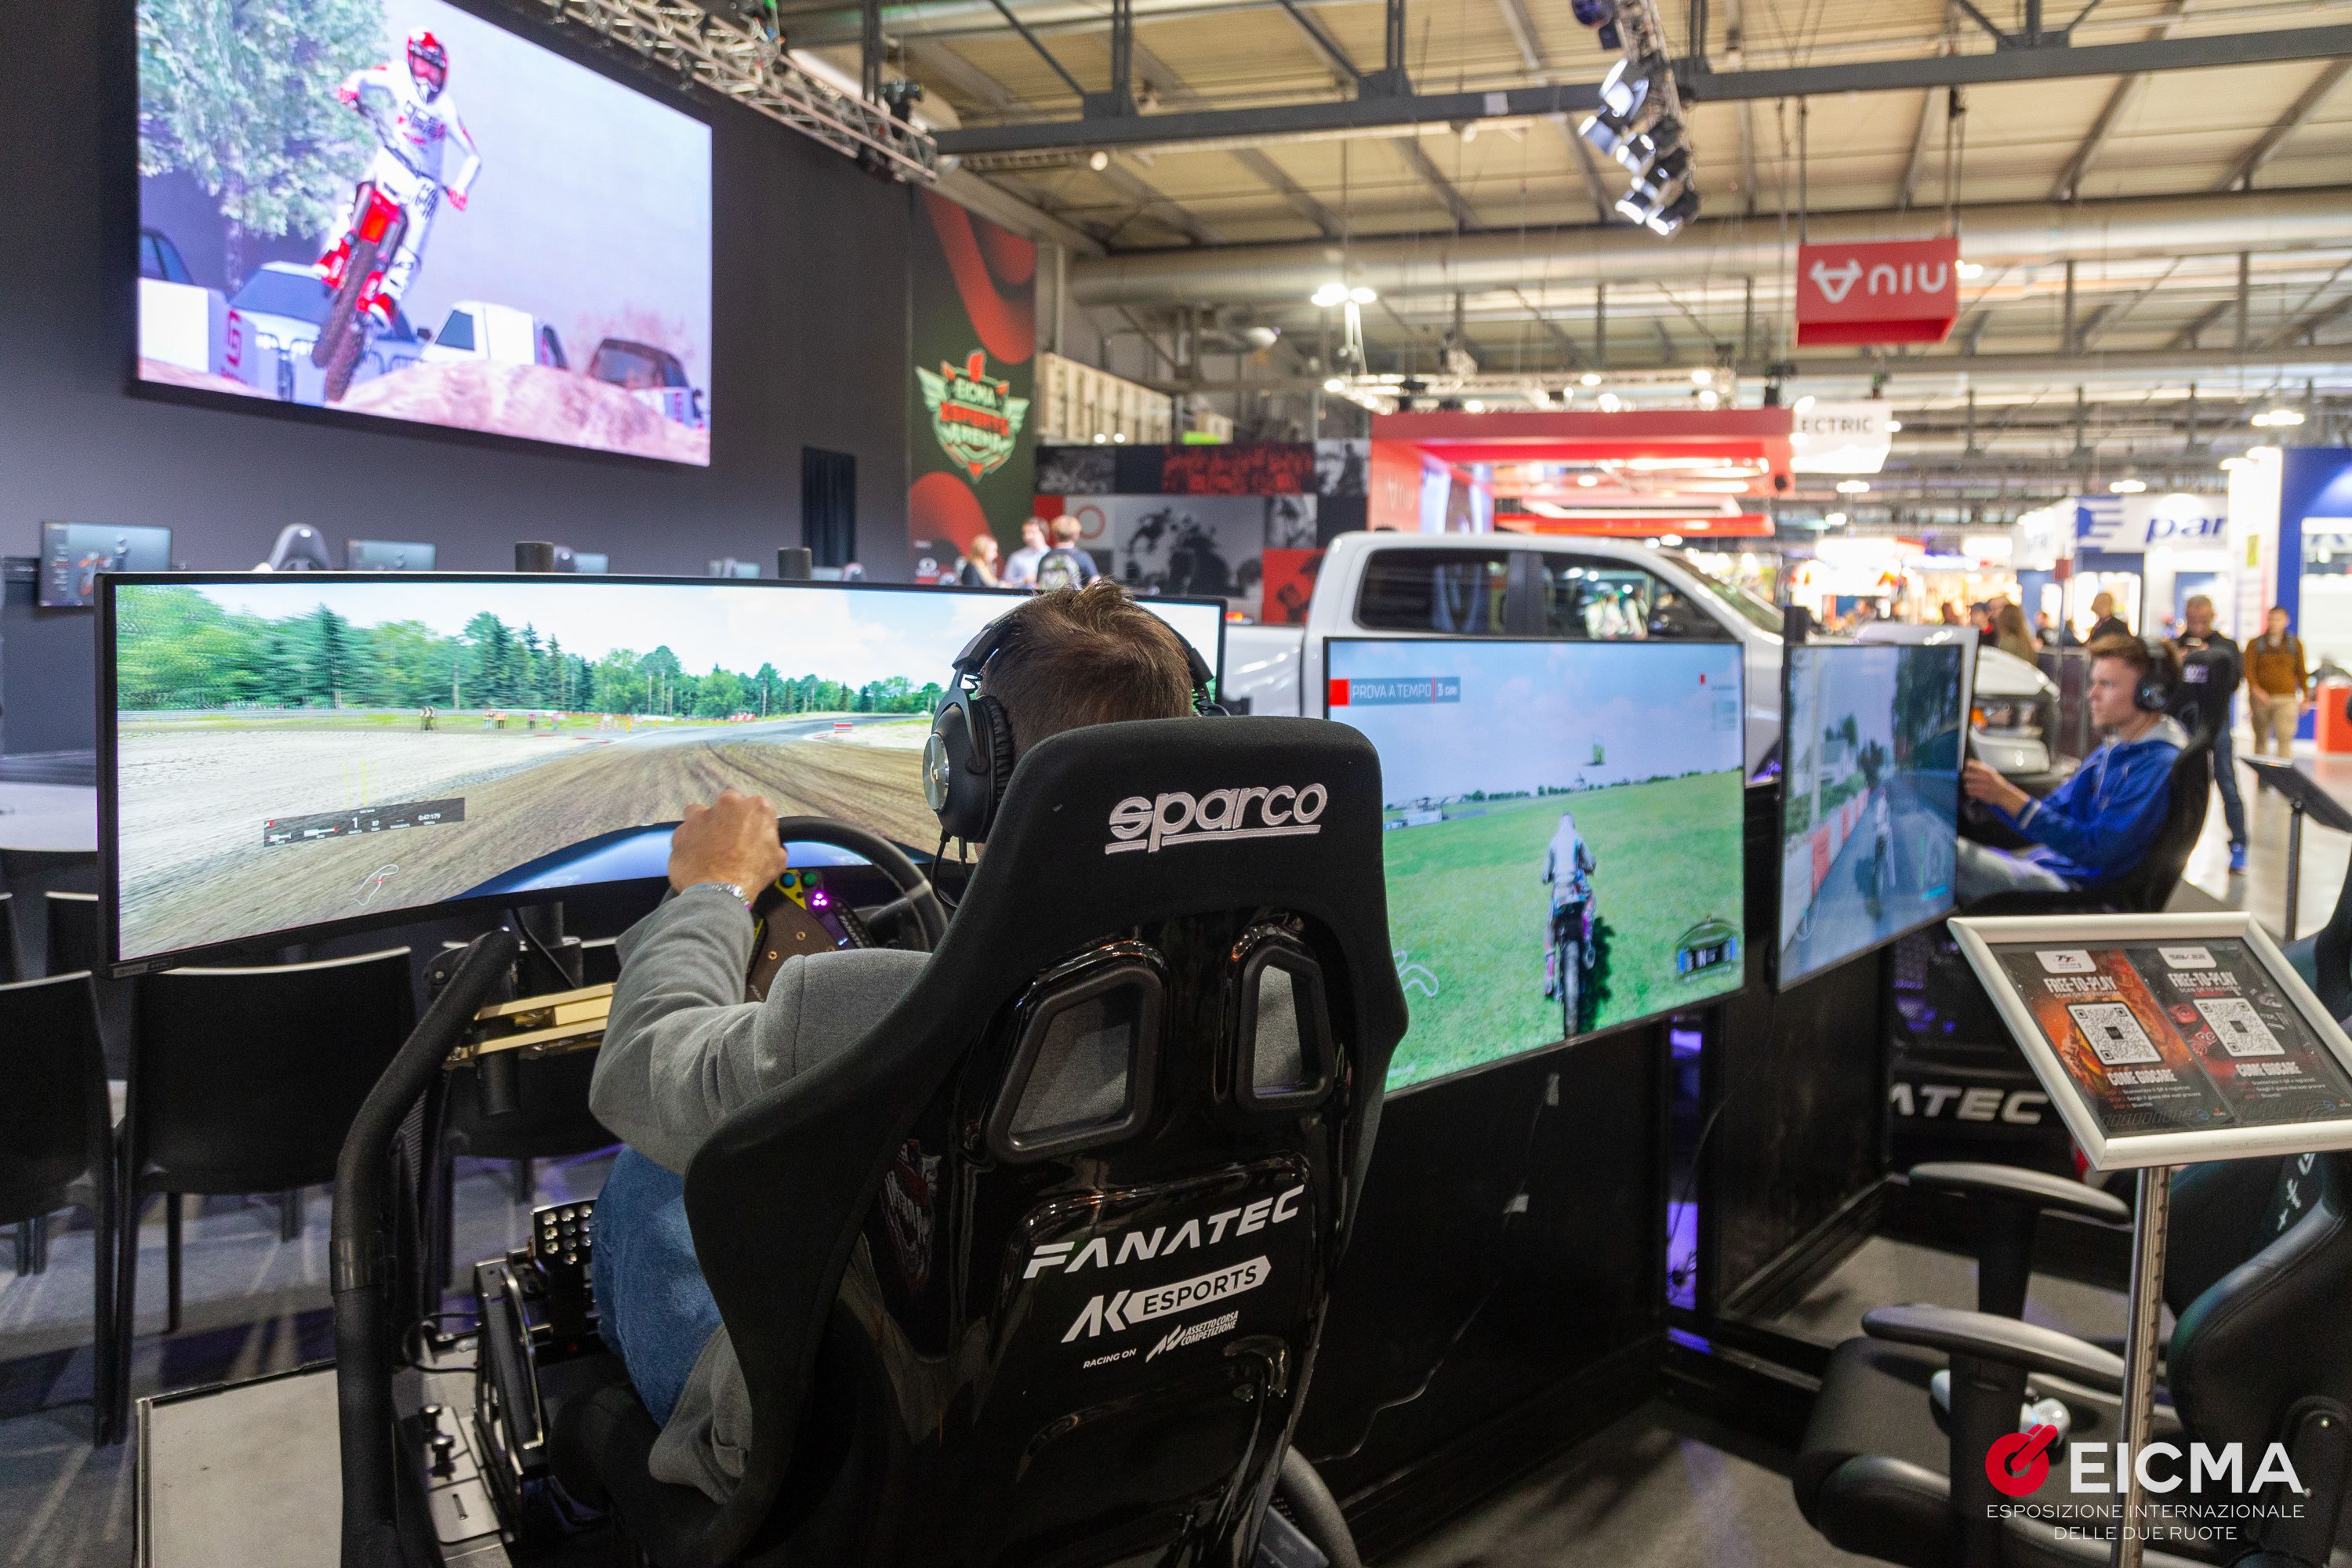 If you're a gamer, EICMA 2023 has got you covered. Courtesy EICMA